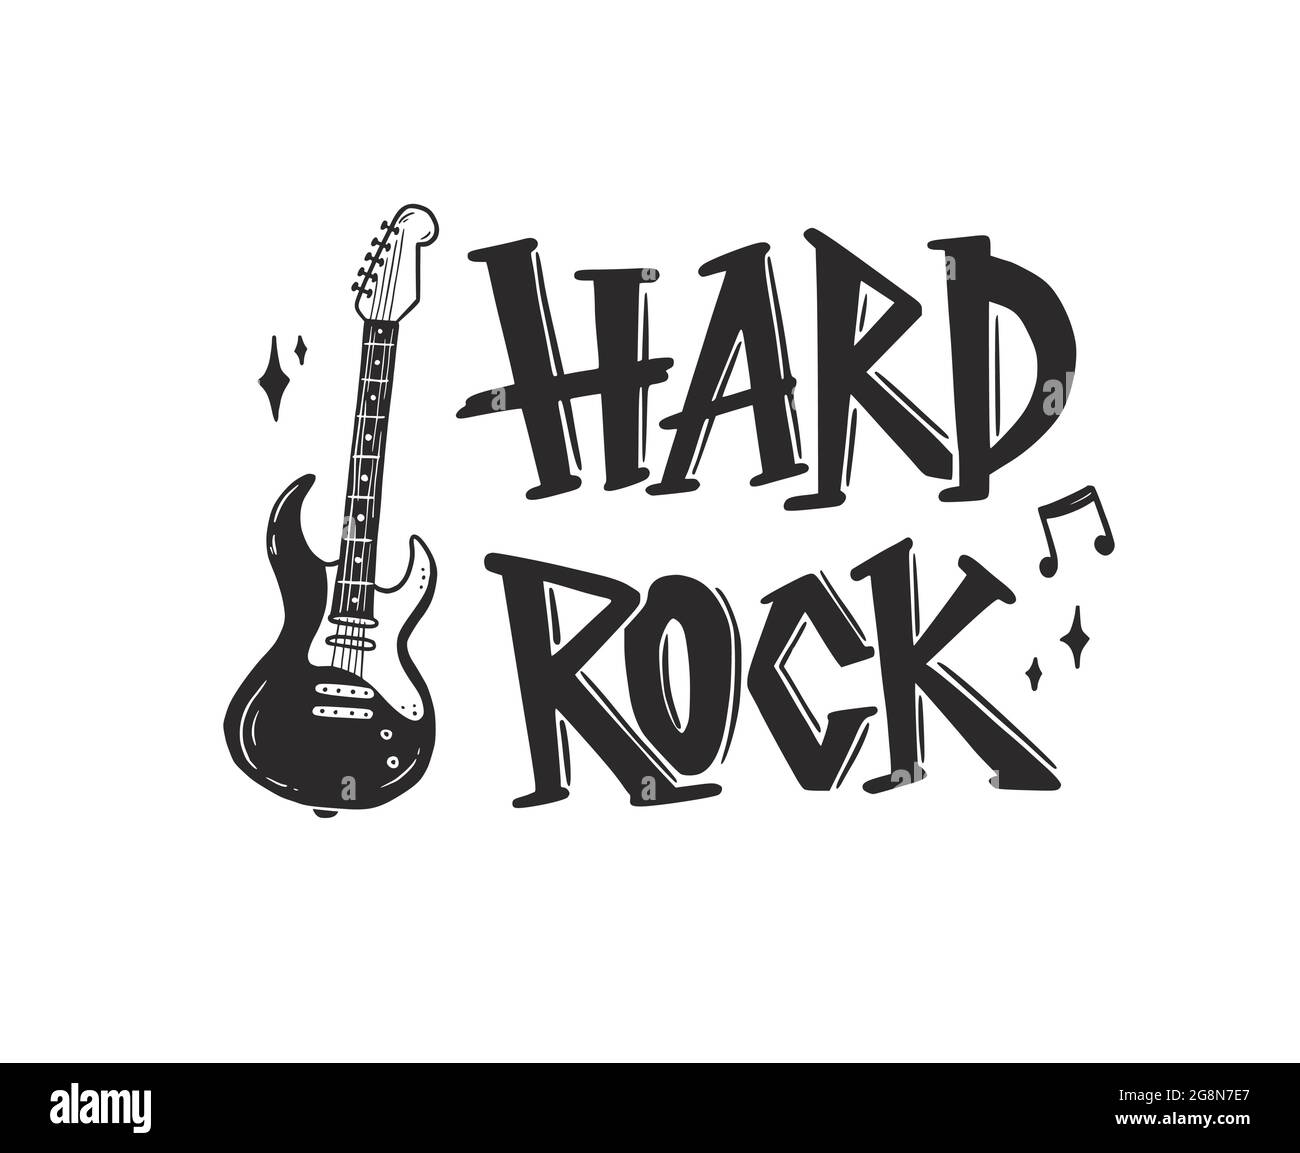 Black and white color of guitar tattoo design 25124252 Vector Art at  Vecteezy